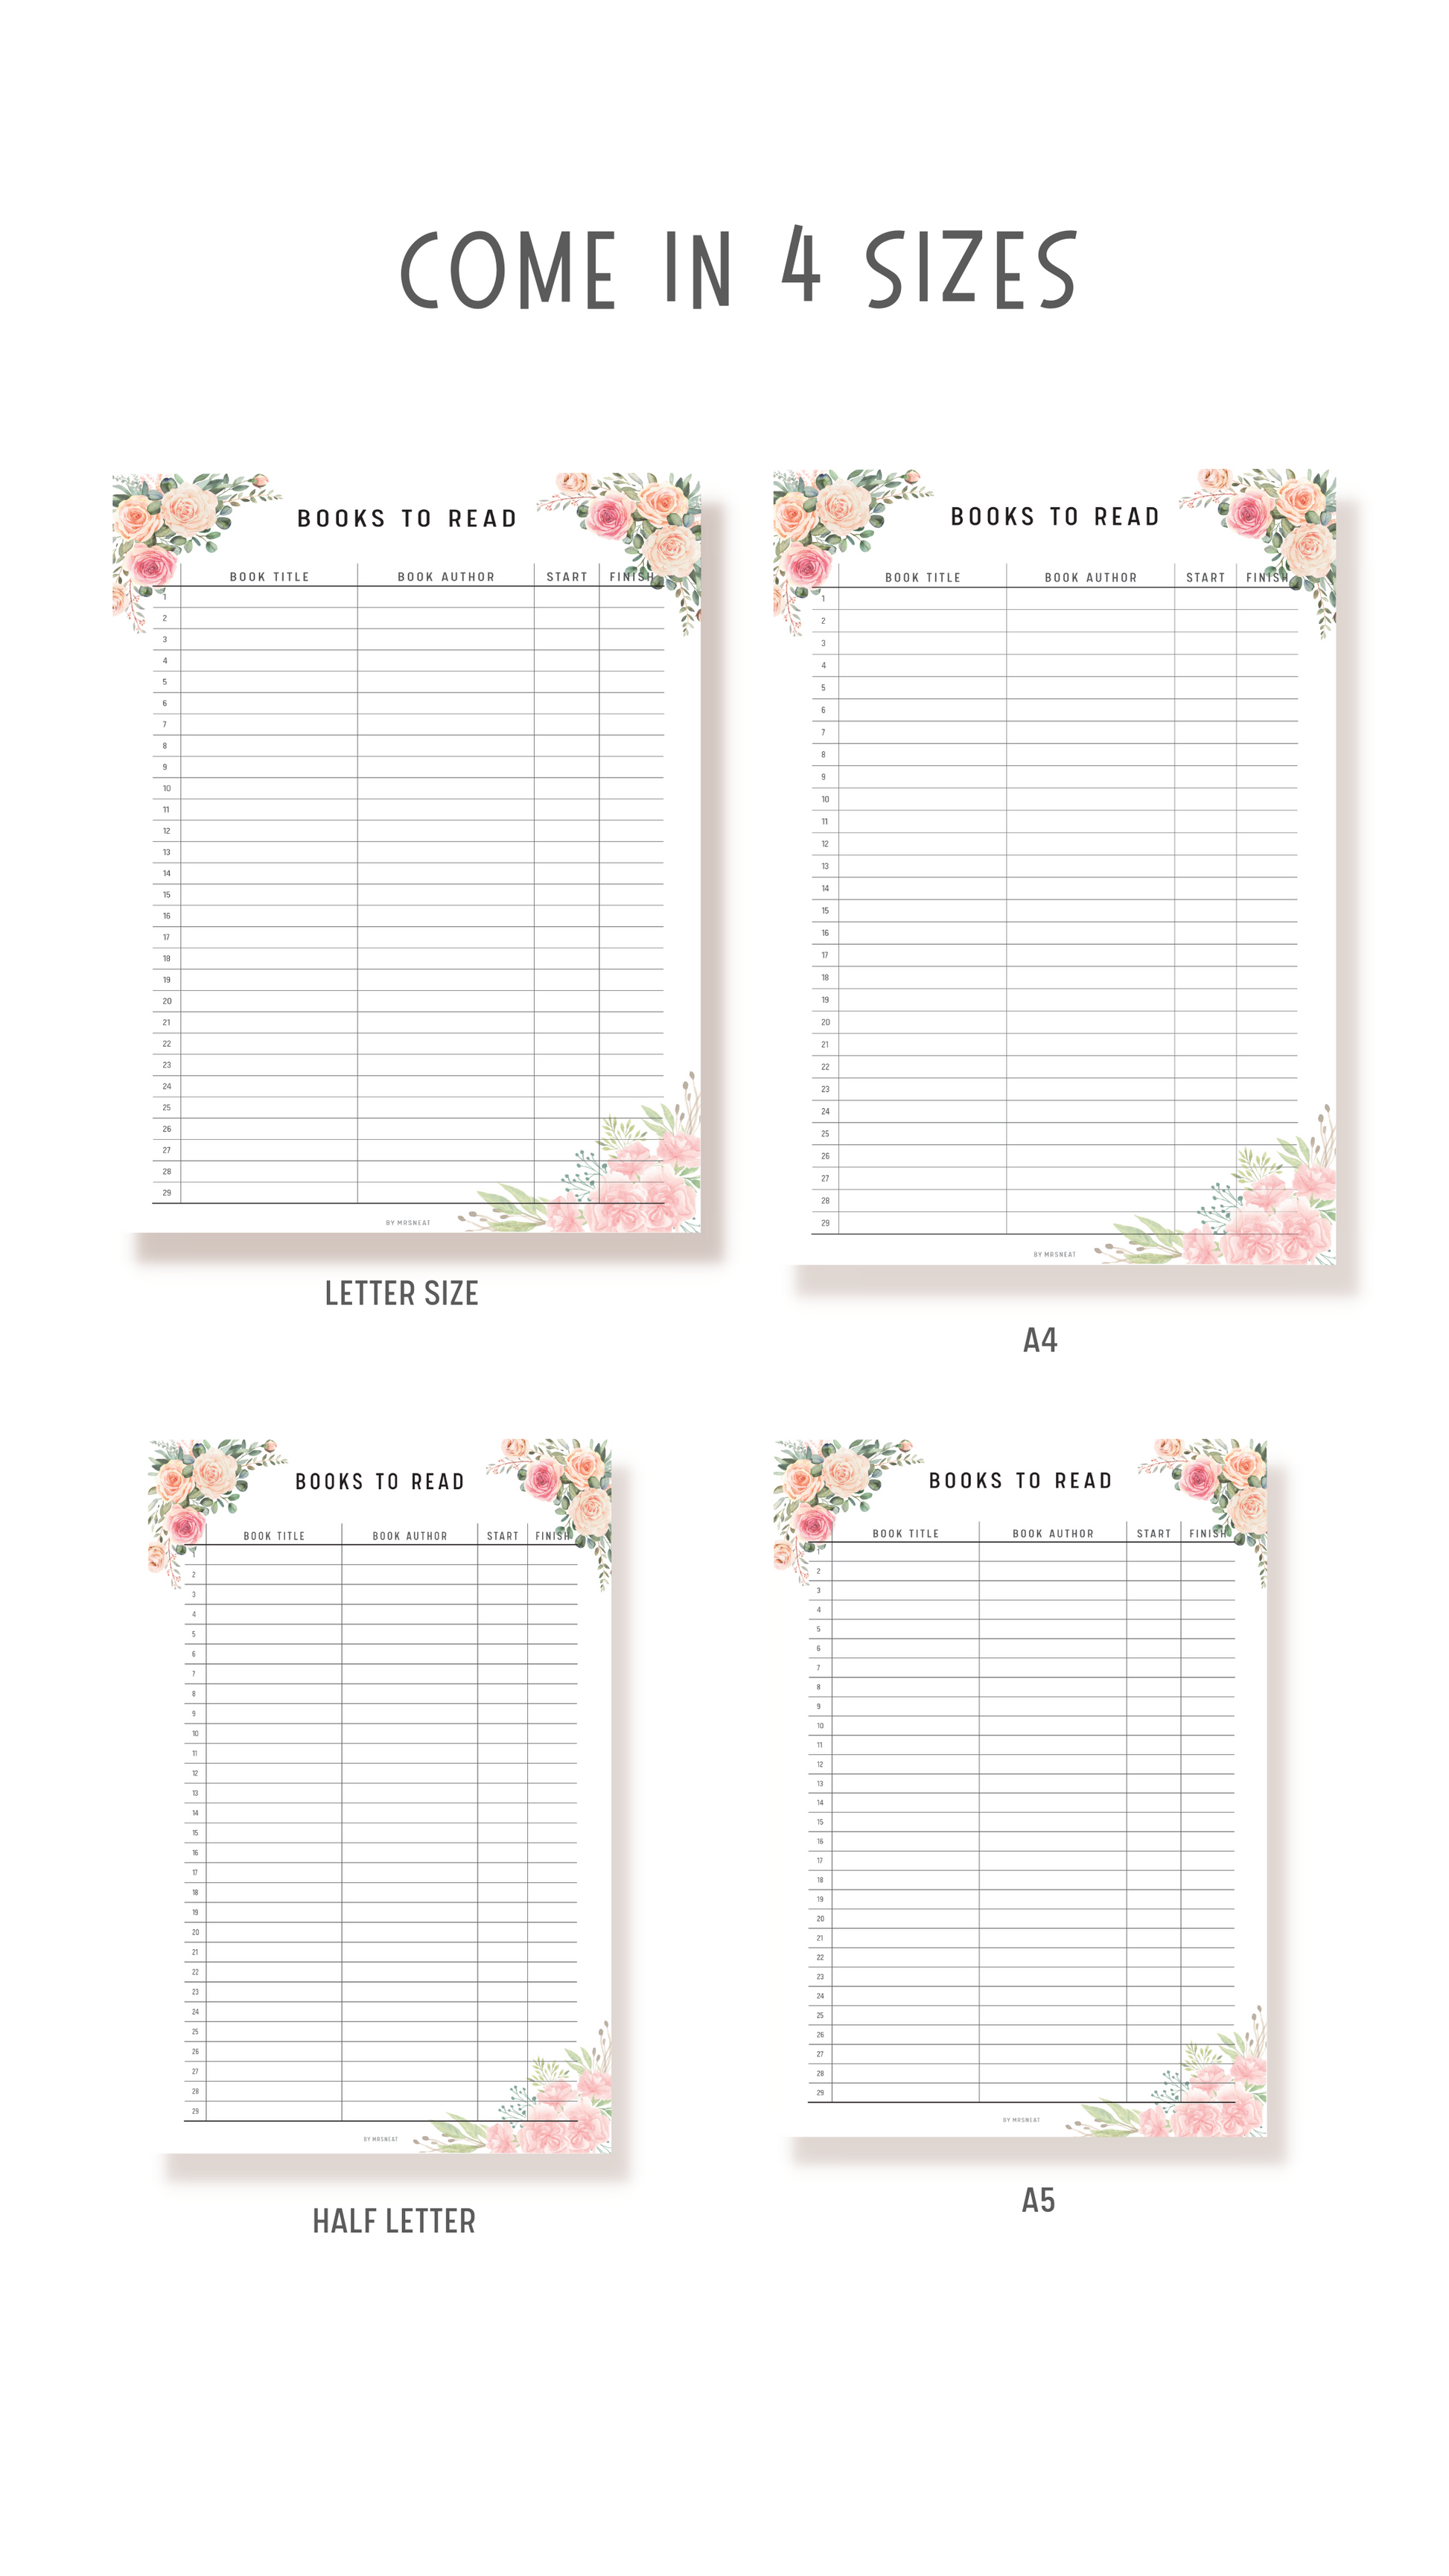 Beautiful Floral Books to Read Planner in A4, A5, Letter and Half Letter size